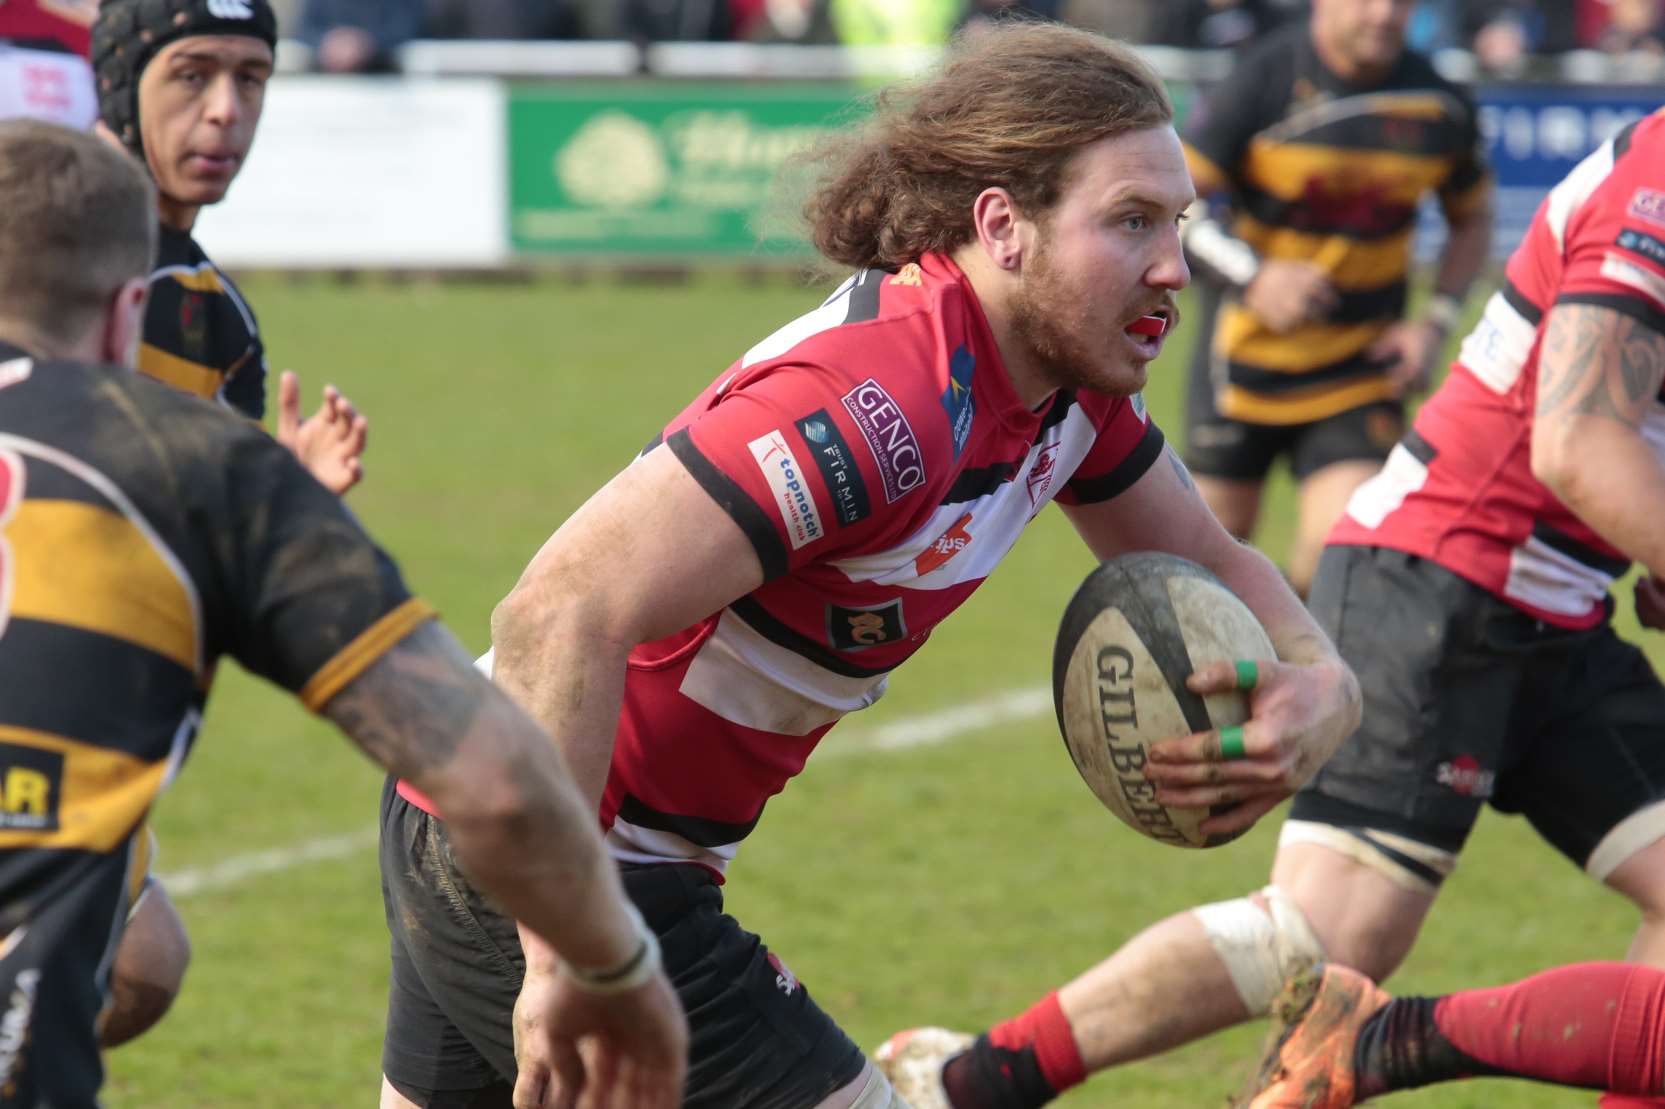 Ben Brill bows out for Maidstone at Twickenham this weekend hoping for a winning finale Picture: Martin Apps